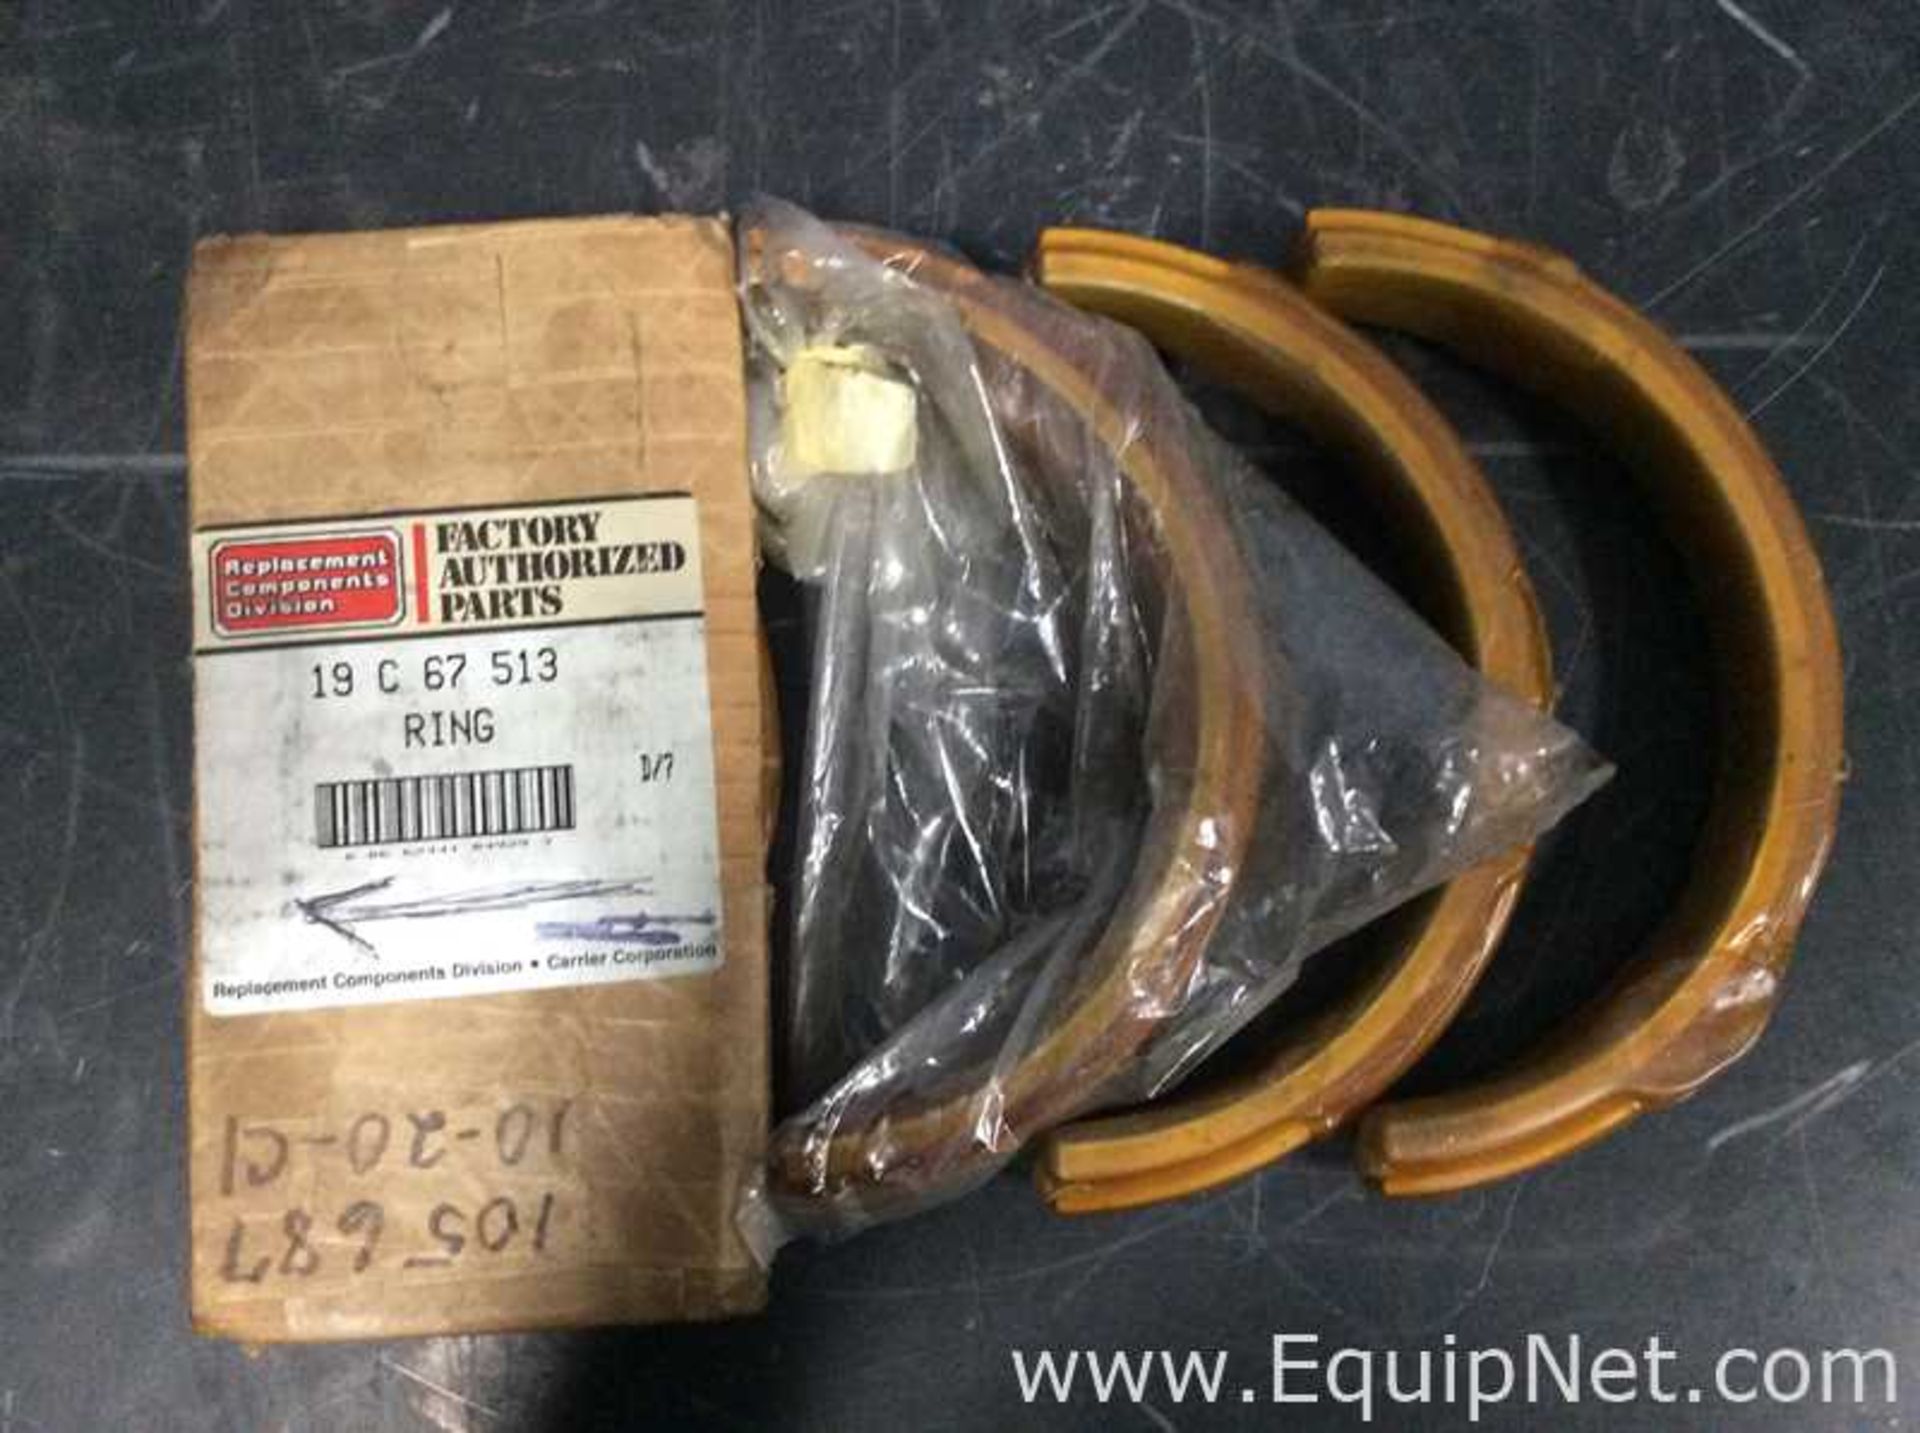 Lot of 4 Factory Authorized Parts Half Rings